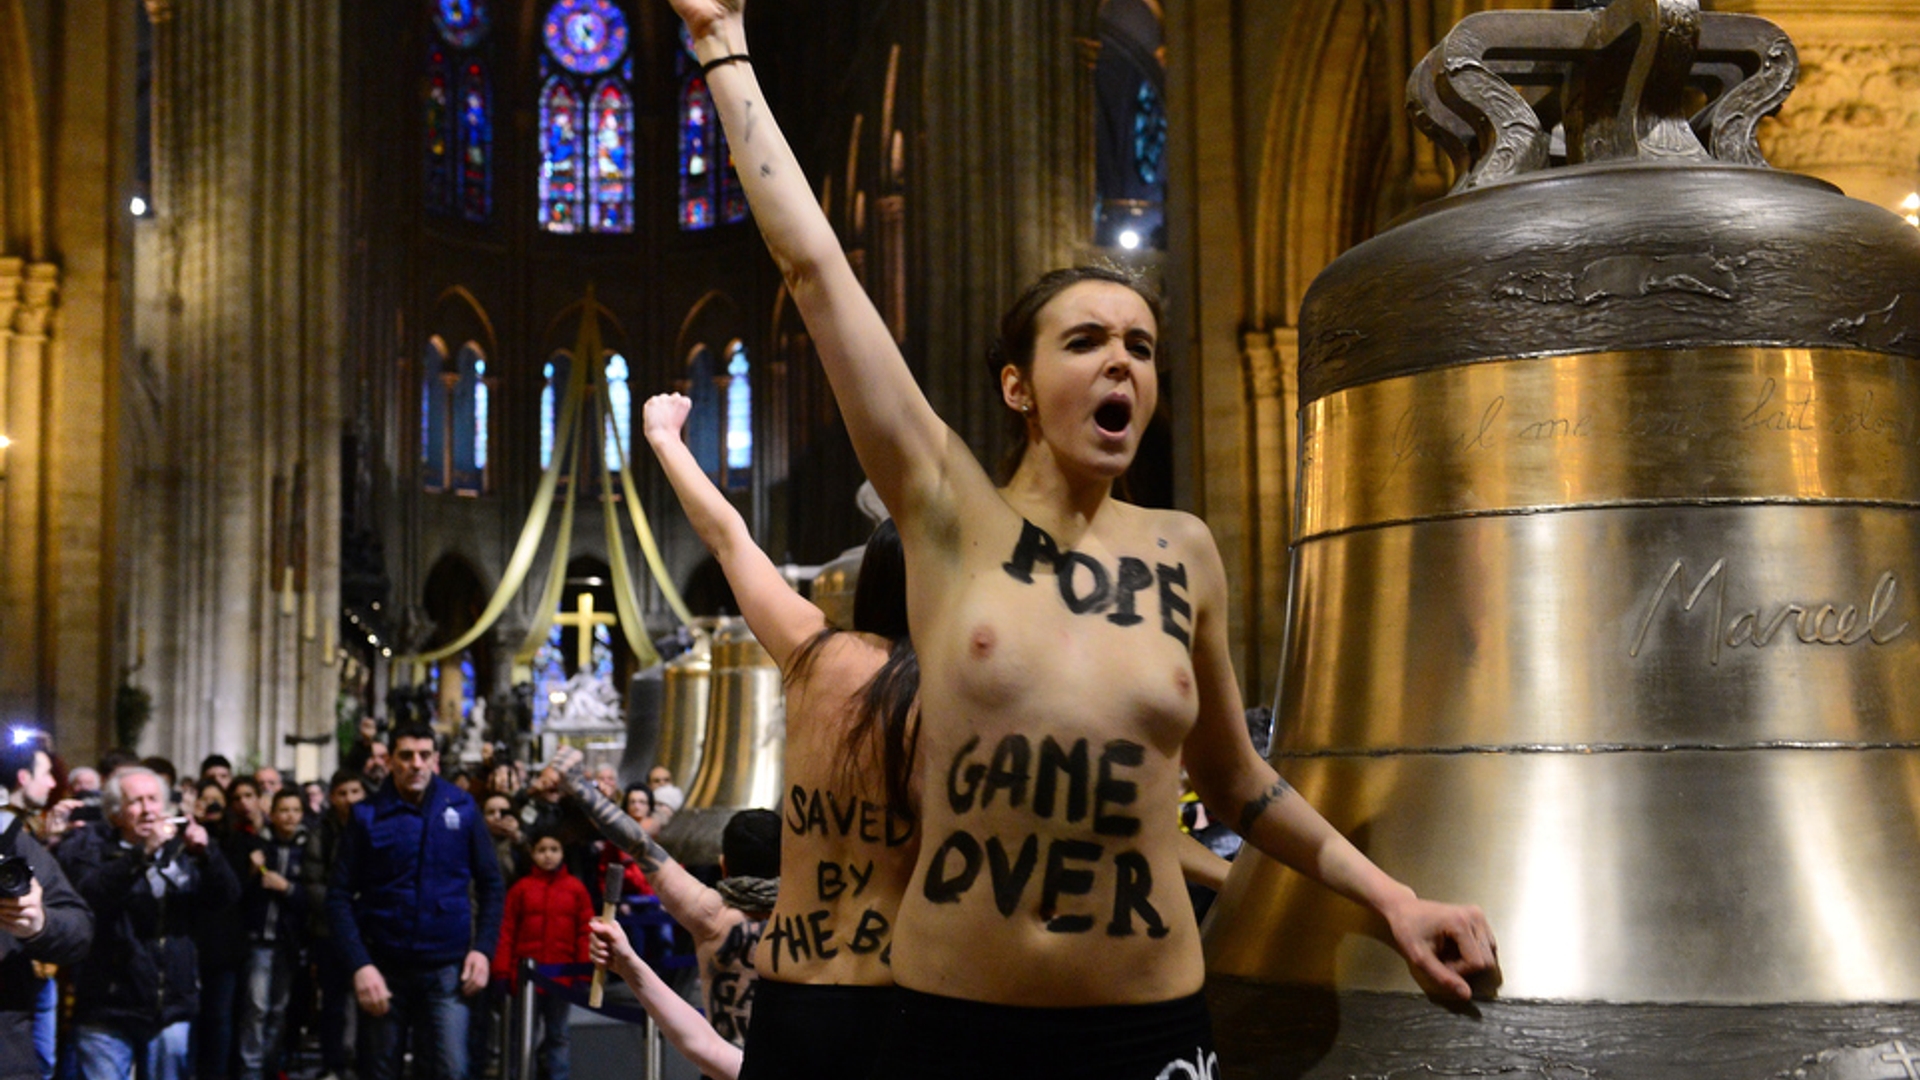 'Femen' marke pope decision to resign, inside Notre Dame cathedral - Paris